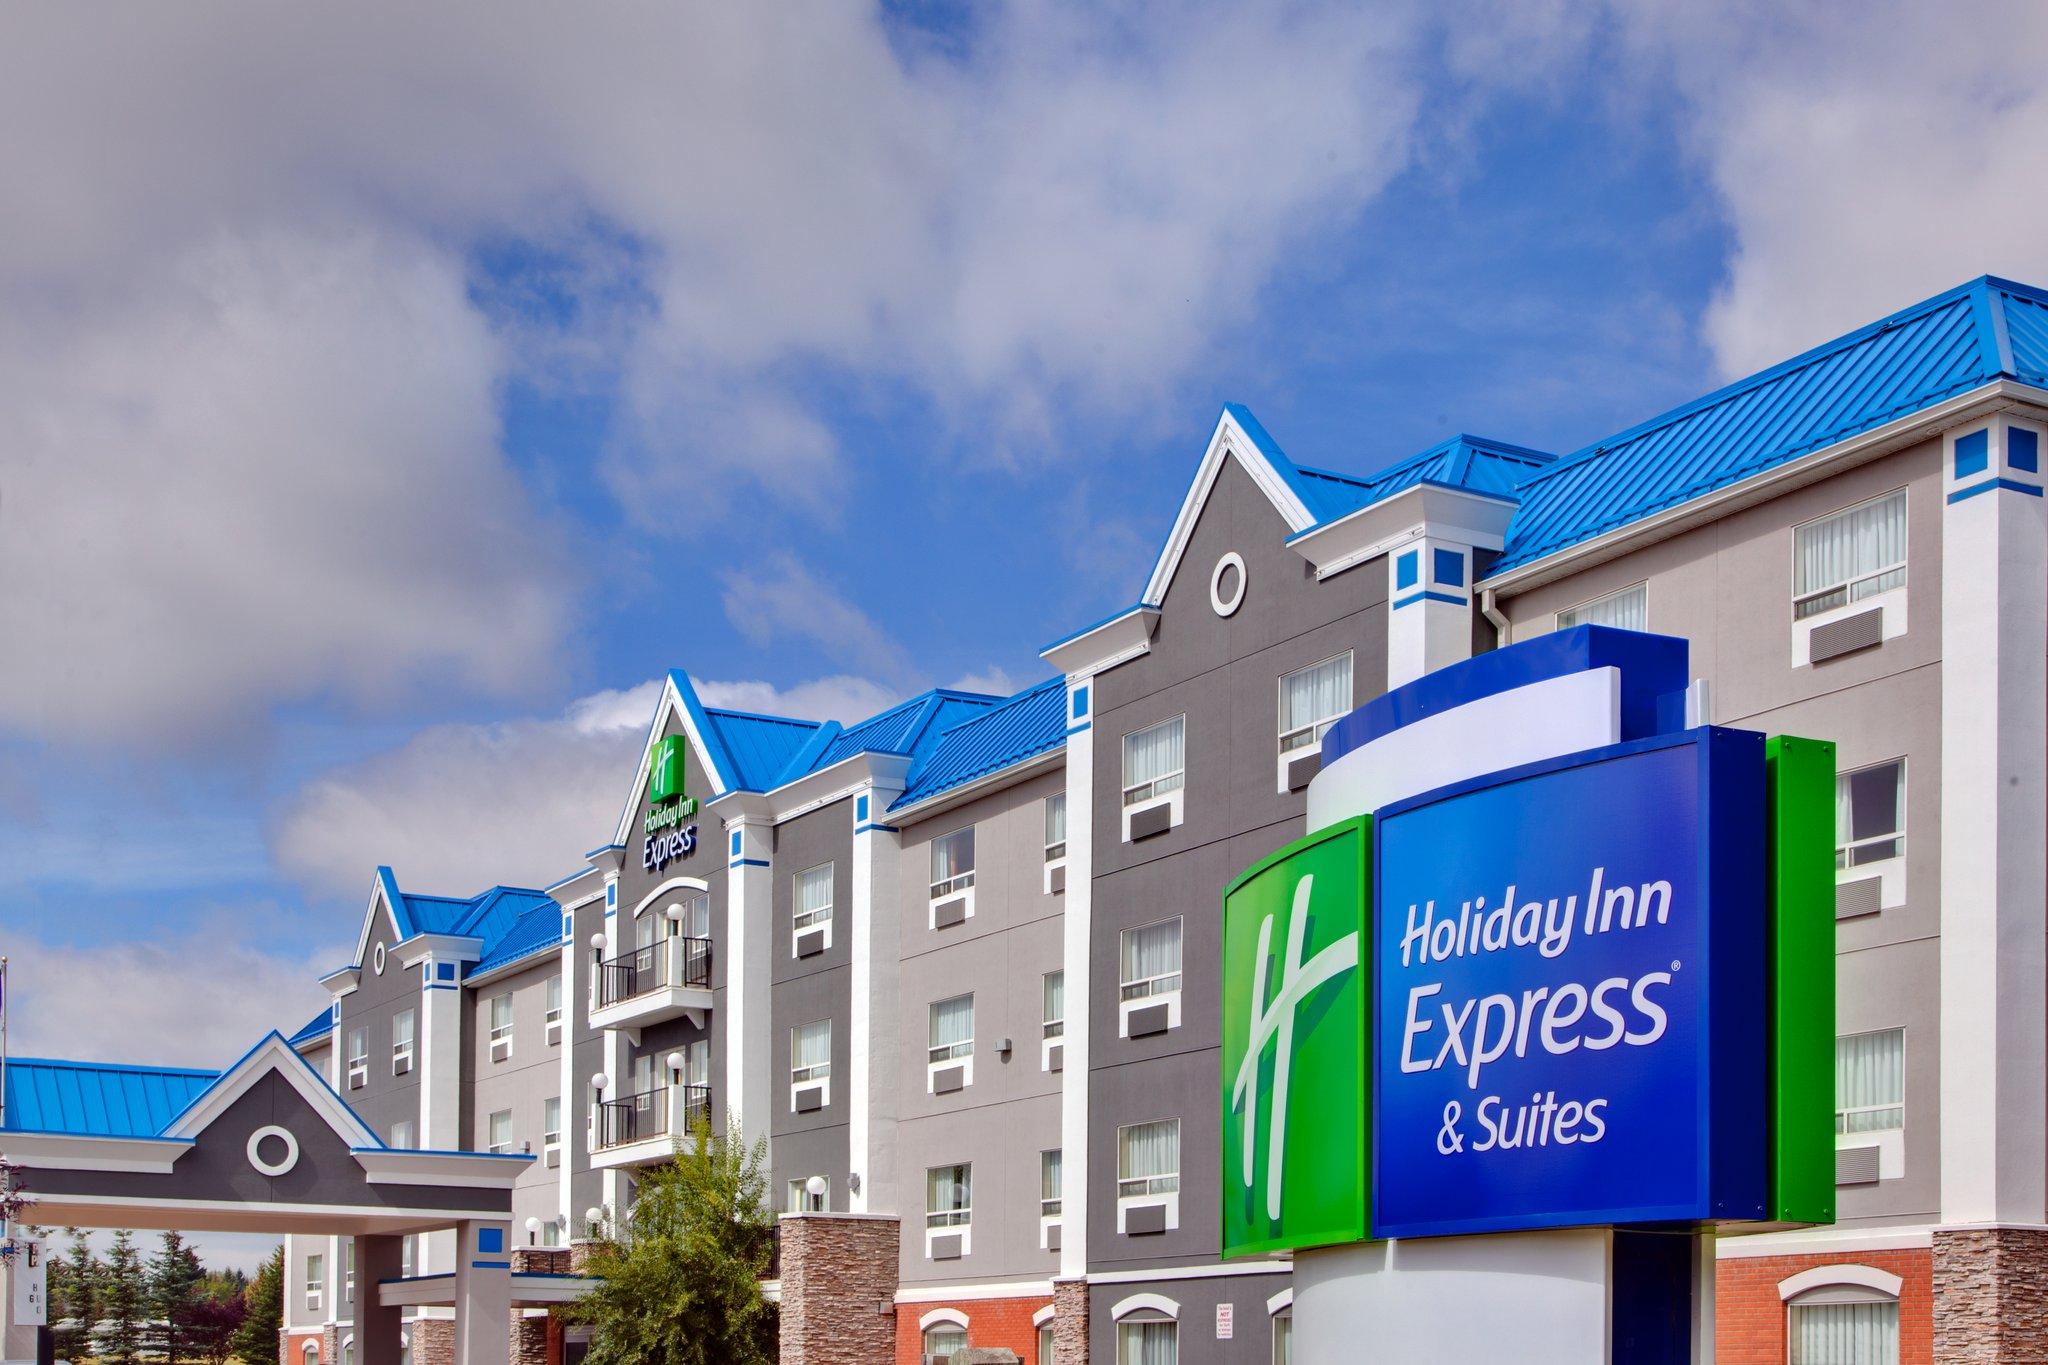 Holiday Inn Express & Suites Calgary South-Macleod Trail S in Calgary, AB